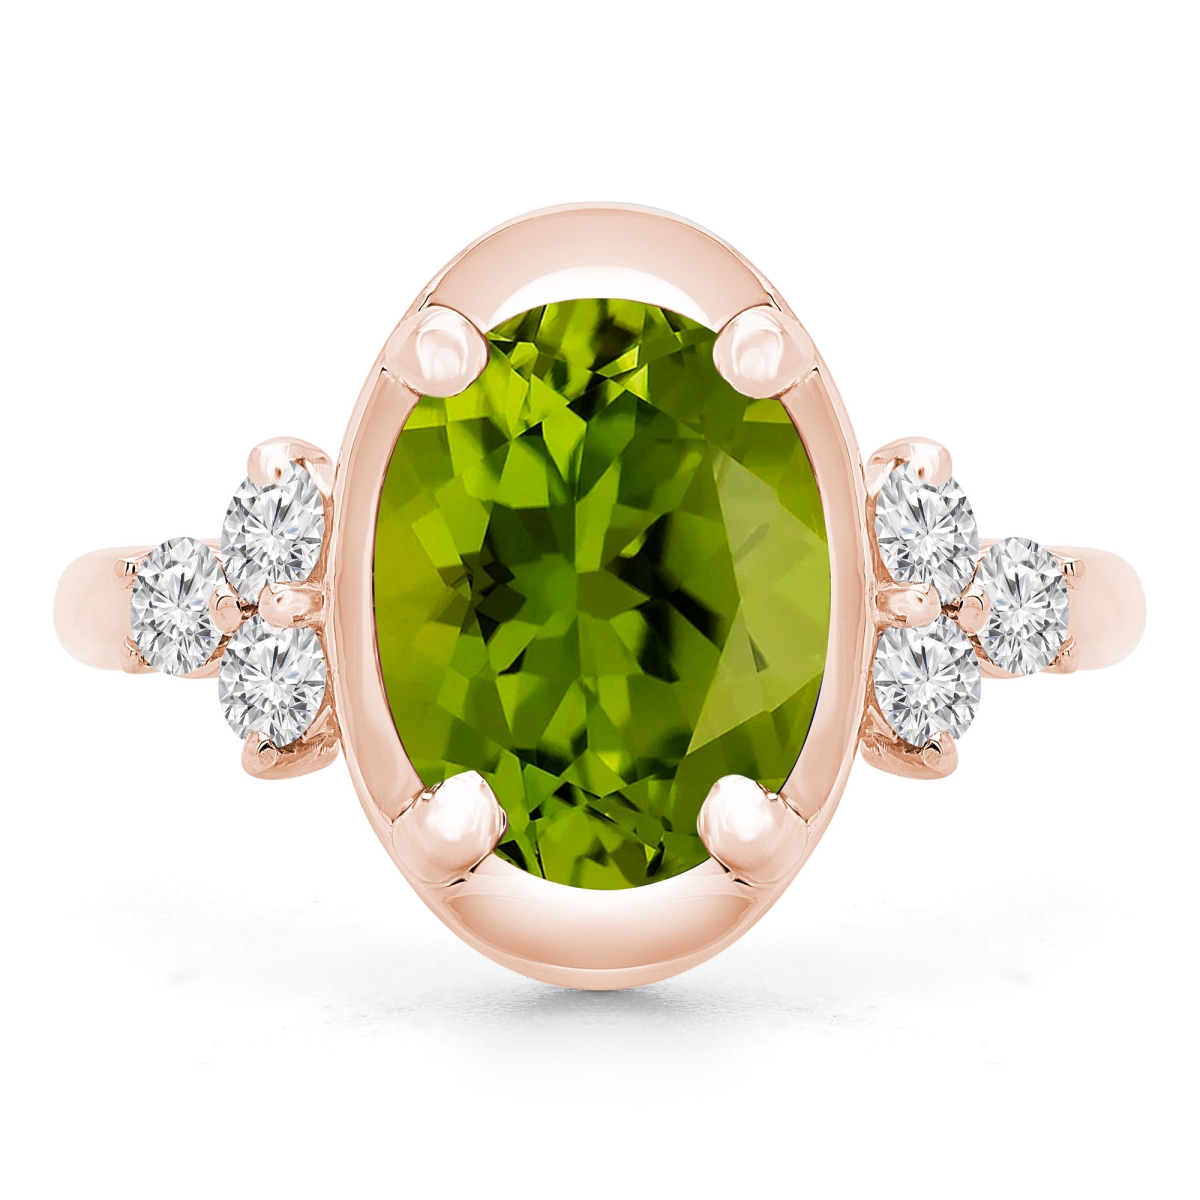 Picture of Majesty Diamonds MD190412-5.5 3.9 CTW Oval Green Peridot Cocktail Ring in 14K Rose Gold - Size 5.5